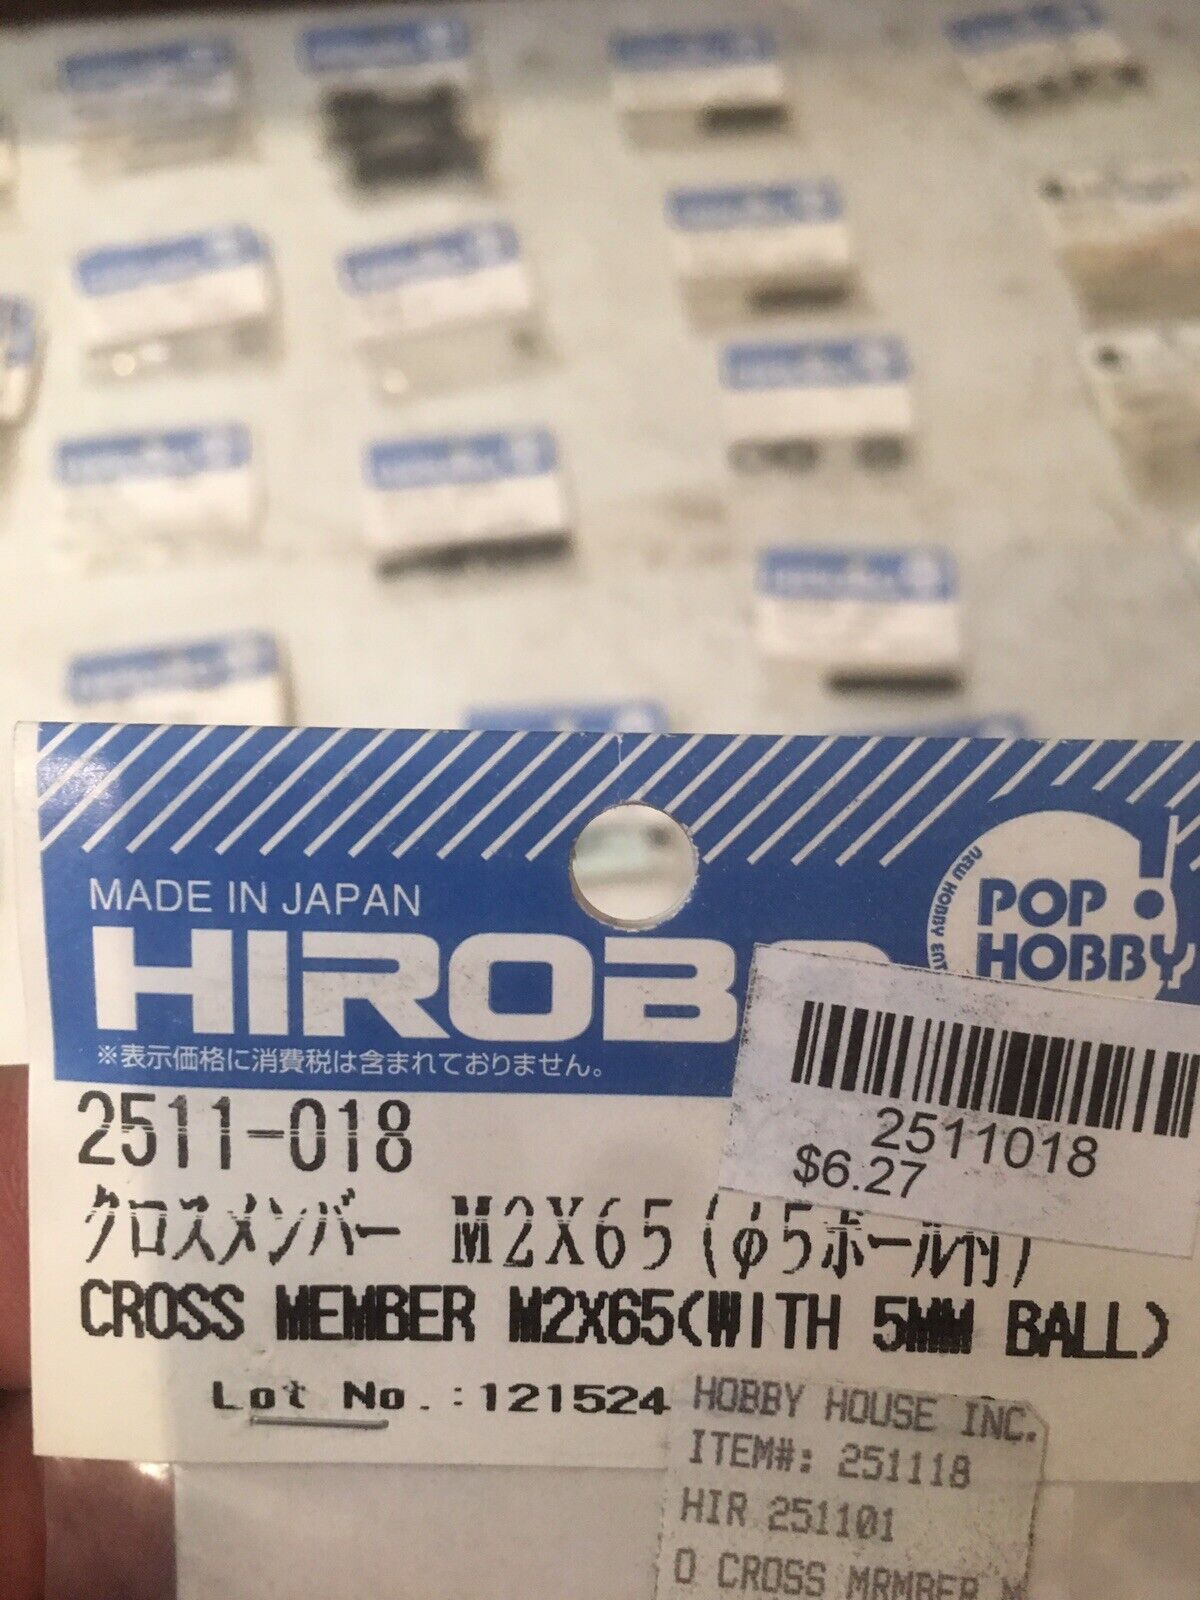 HIROBO 2511-018 CROSS MEMBER M2 X 65 WITH 5MM BALL #2511018 HELICOPTER PARTS